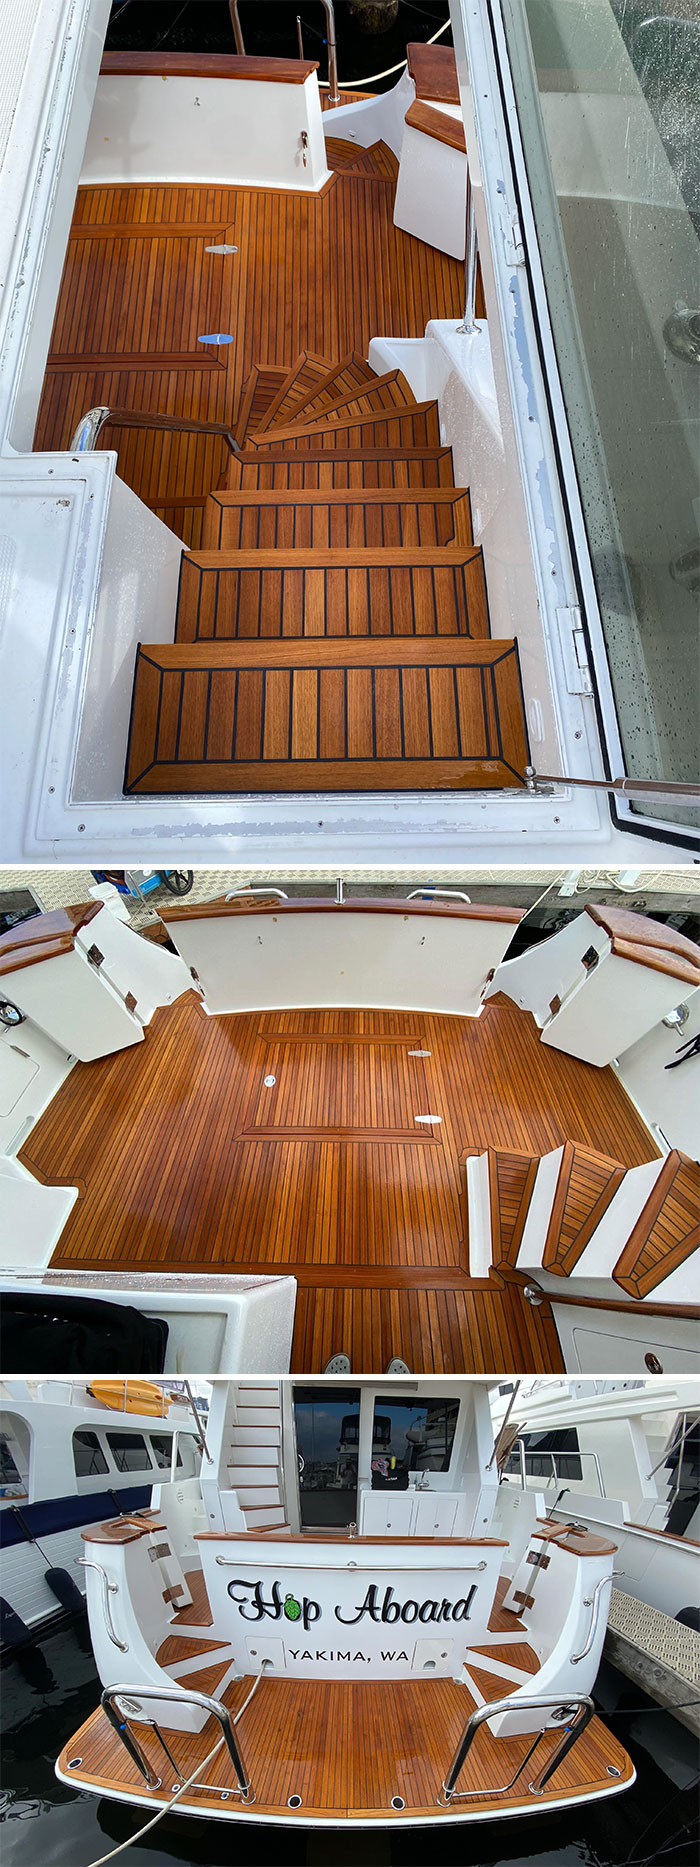 Here’s A Teak Deck I Designed And Installed Last Winter. Went Onboard Yesterday To Do Some Touch-Up Work And Managed To Get Some Pictures Of The Final Results